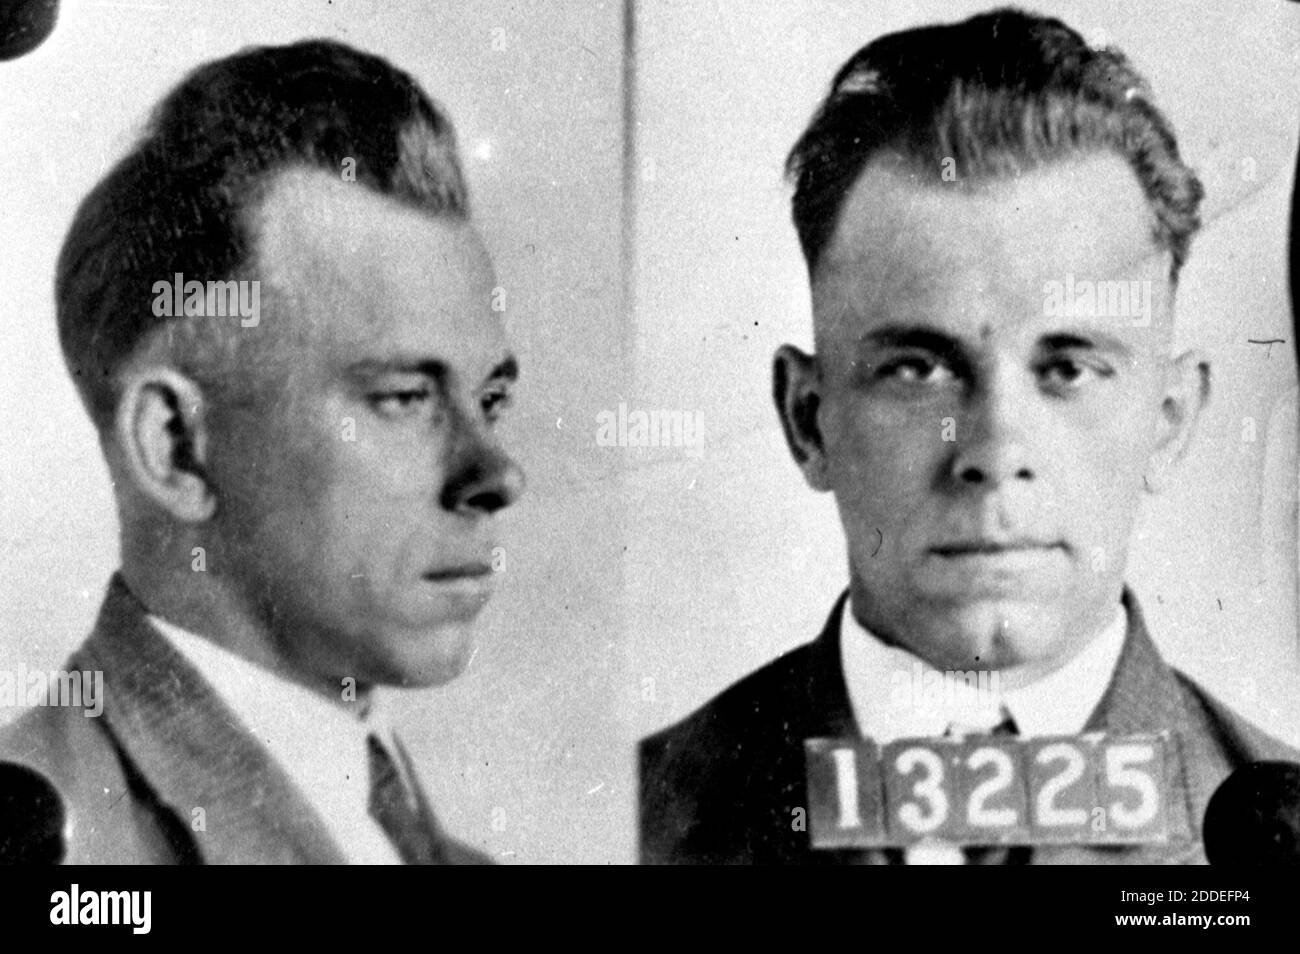 NO FILM, NO VIDEO, NO TV, NO DOCUMENTARY - Copy photo of John Dillinger, circa December 1933. The body of John Dillinger, a notorious American gangster who operated during the Great Depression, is set to be exhumed from its resting place in an Indiana cemetery. On July 3, the Indiana State Department of Health approved an application submitted by Dillinger's nephew, Michael Thompson. Dillinger's body will be exhumed and reinterred by September 16 at Crown Hill Cemetery in Indianapolis, according to the permit. Photo by Chicago Tribune historical photo/TNS/ABACAPRESS.COM Stock Photo